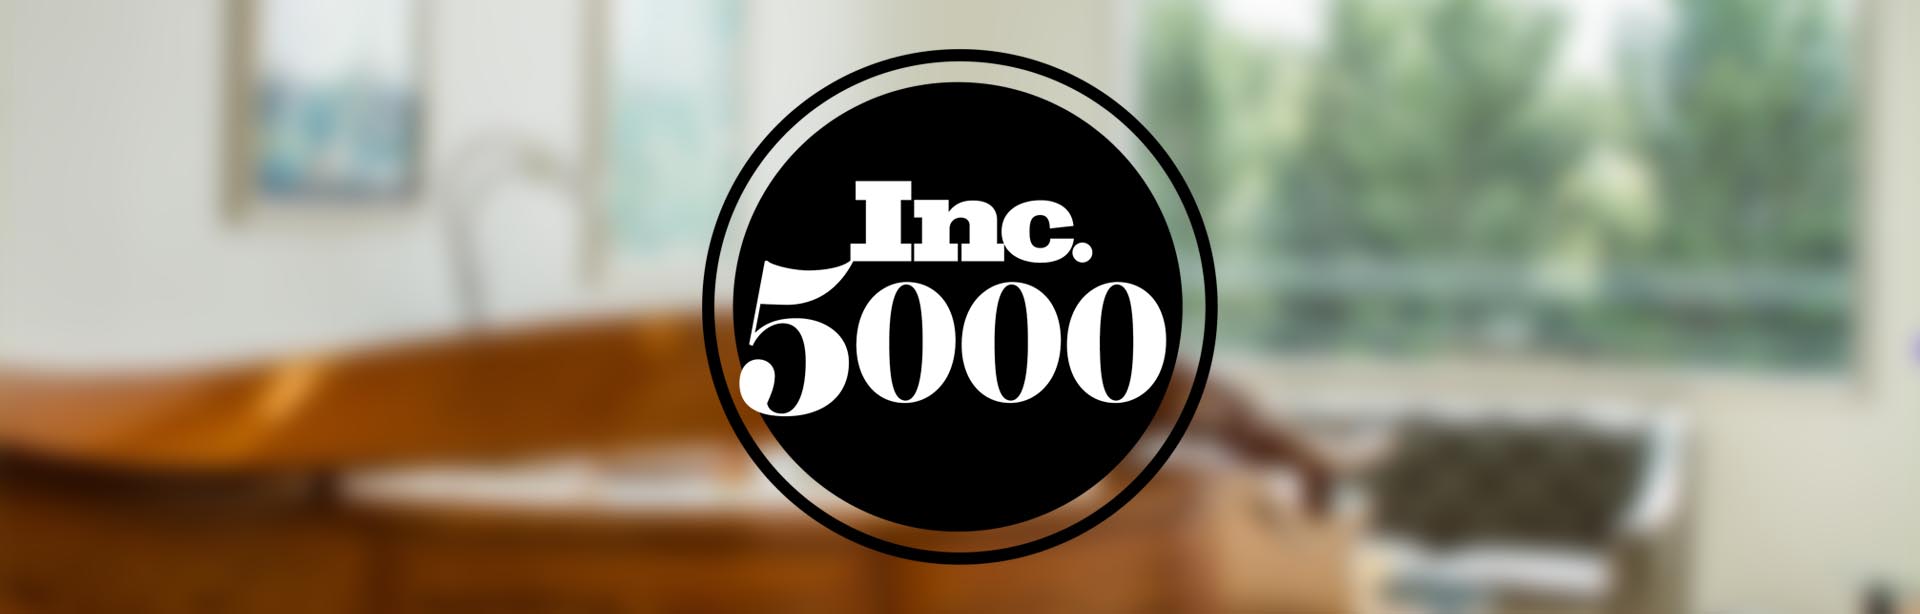 Morris-Sockle Awarded Inc 5000 for the Third Year in a Row